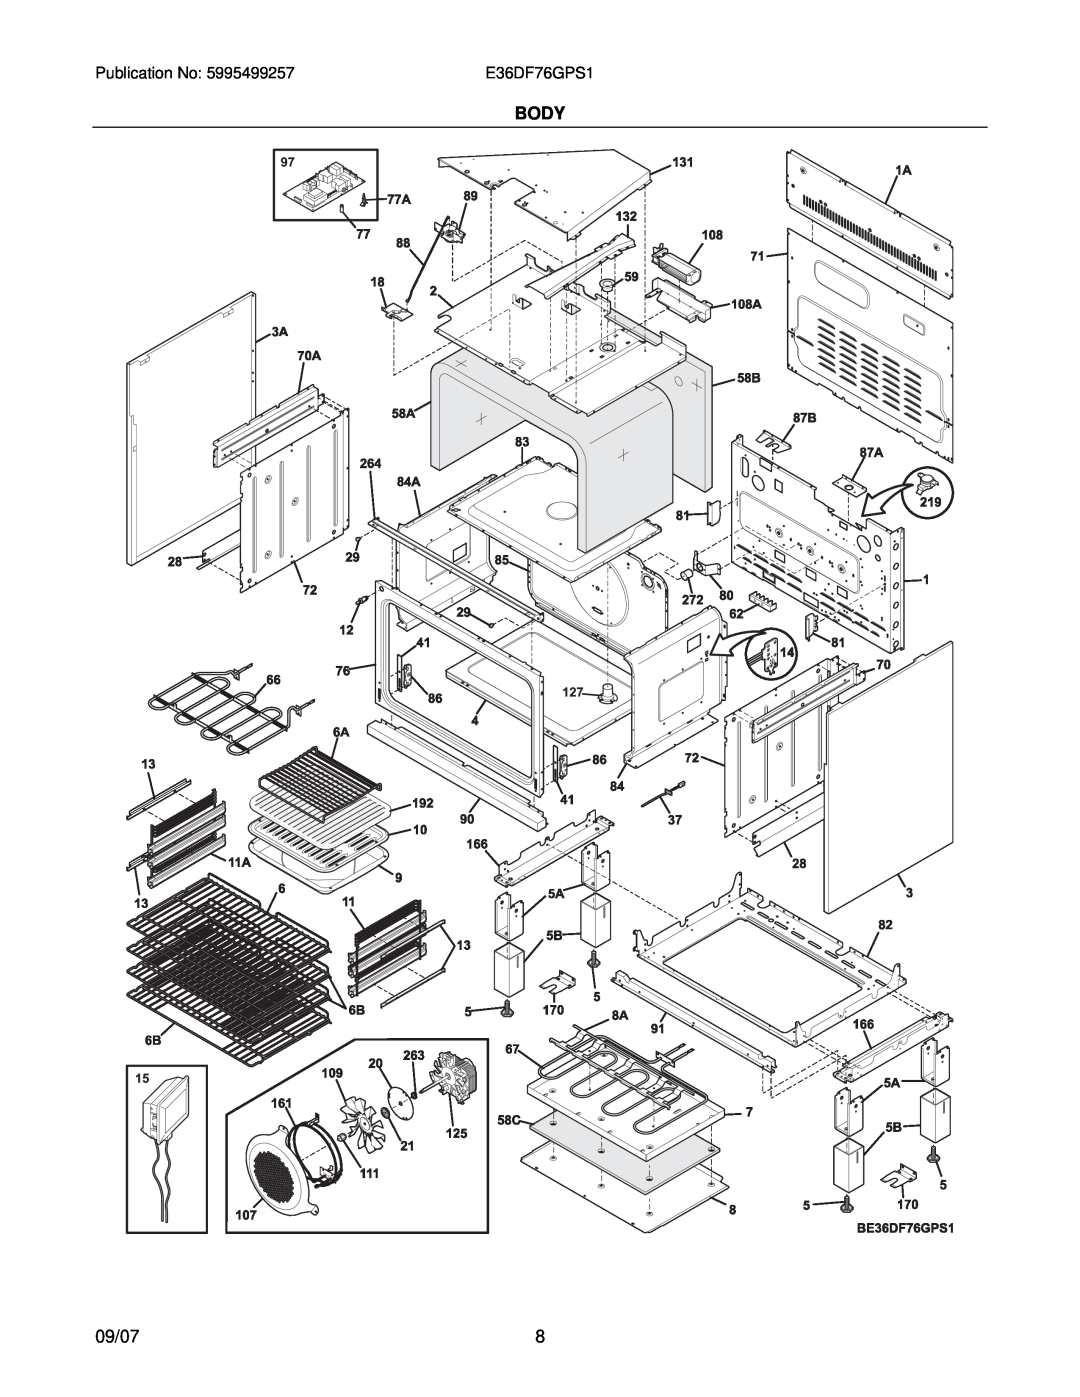 Electrolux 30166673P70S1 installation instructions Body, 09/07, E36DF76GPS1 